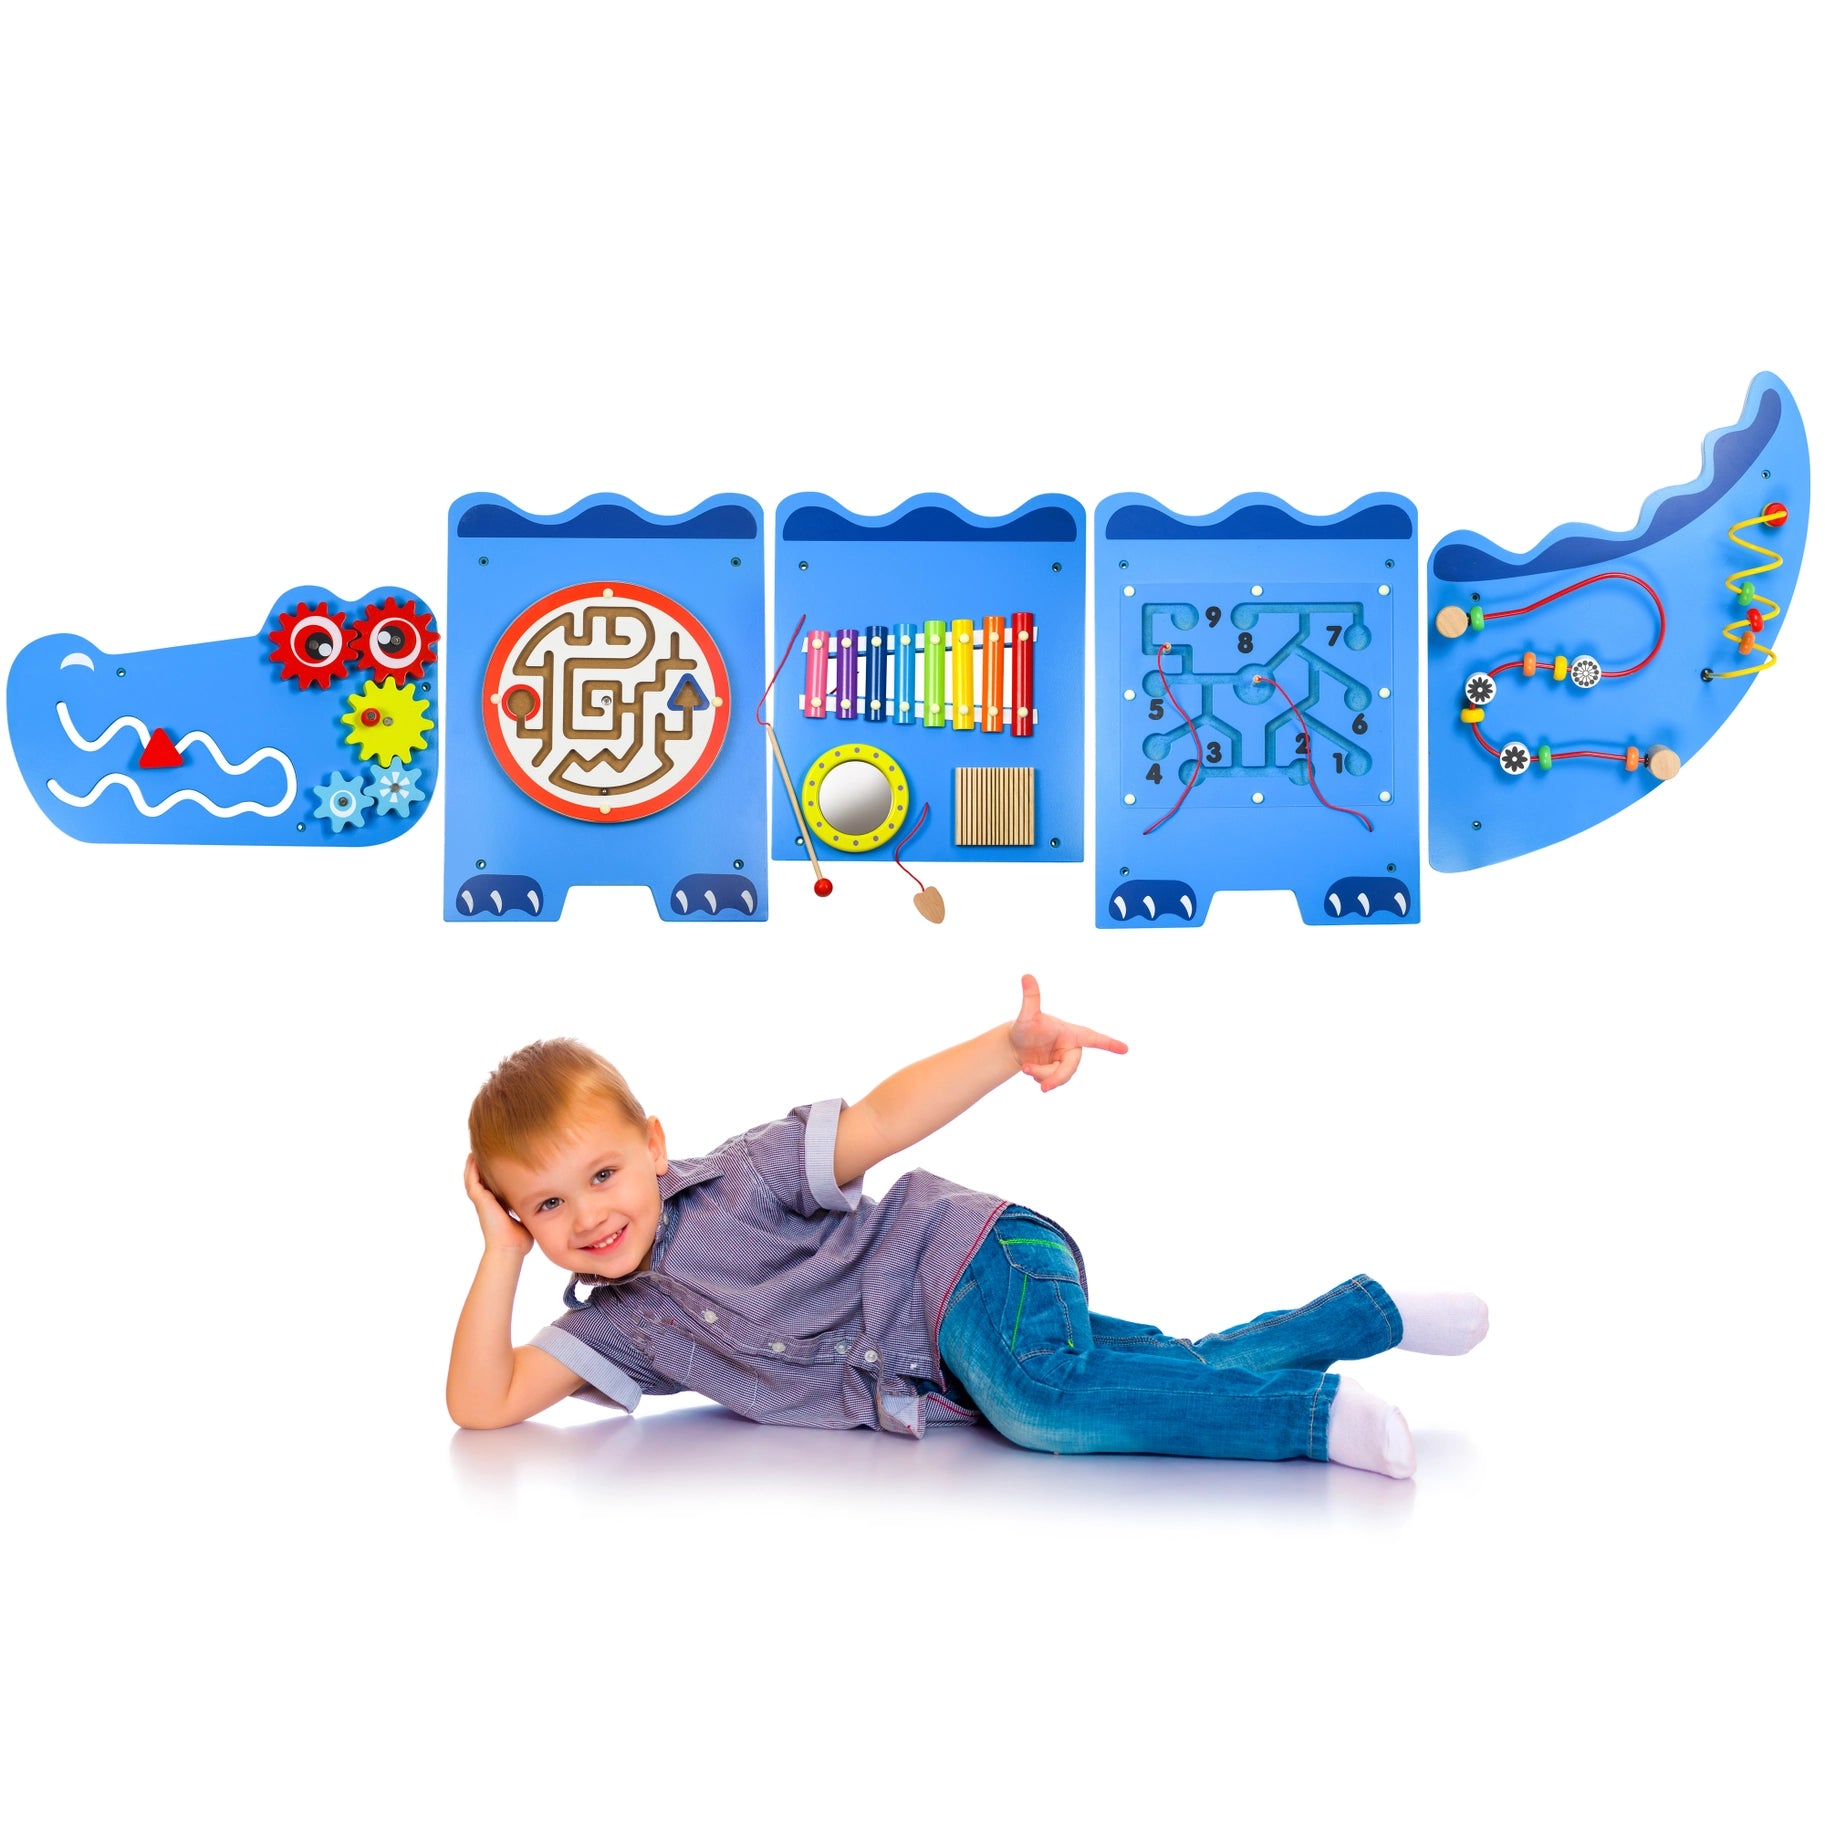 ShpilMaster Wooden Alligator Sensory Wall Mounted Learning Activity Center  For Playroom, Nursery, Preschool, and Doctors' Office